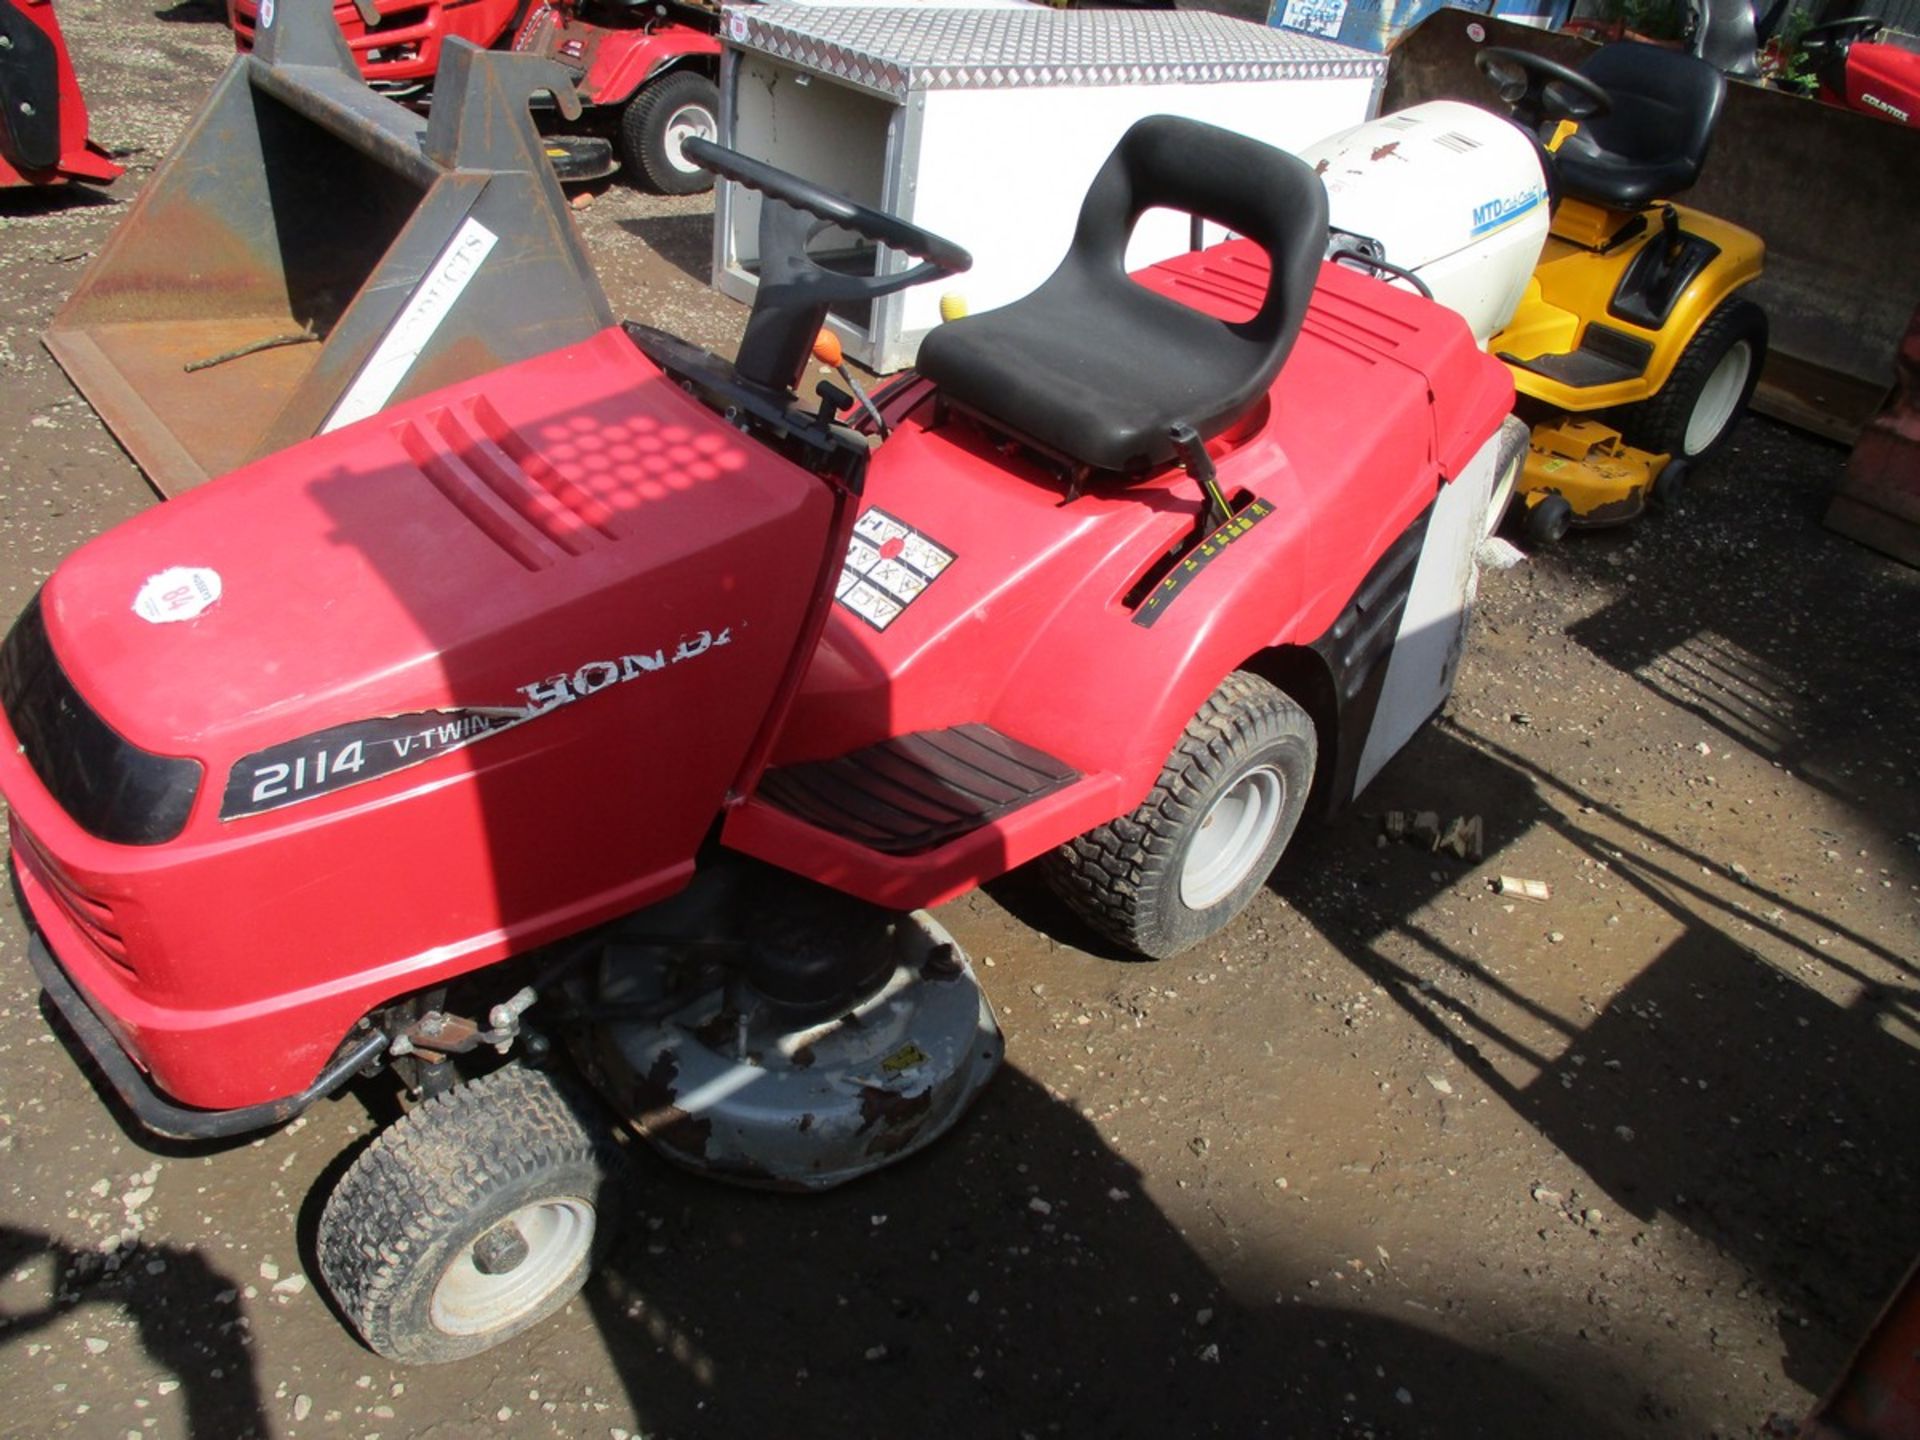 HONDA 2114 RIDE ON MOWER C.W COLLECTOR - Image 2 of 4